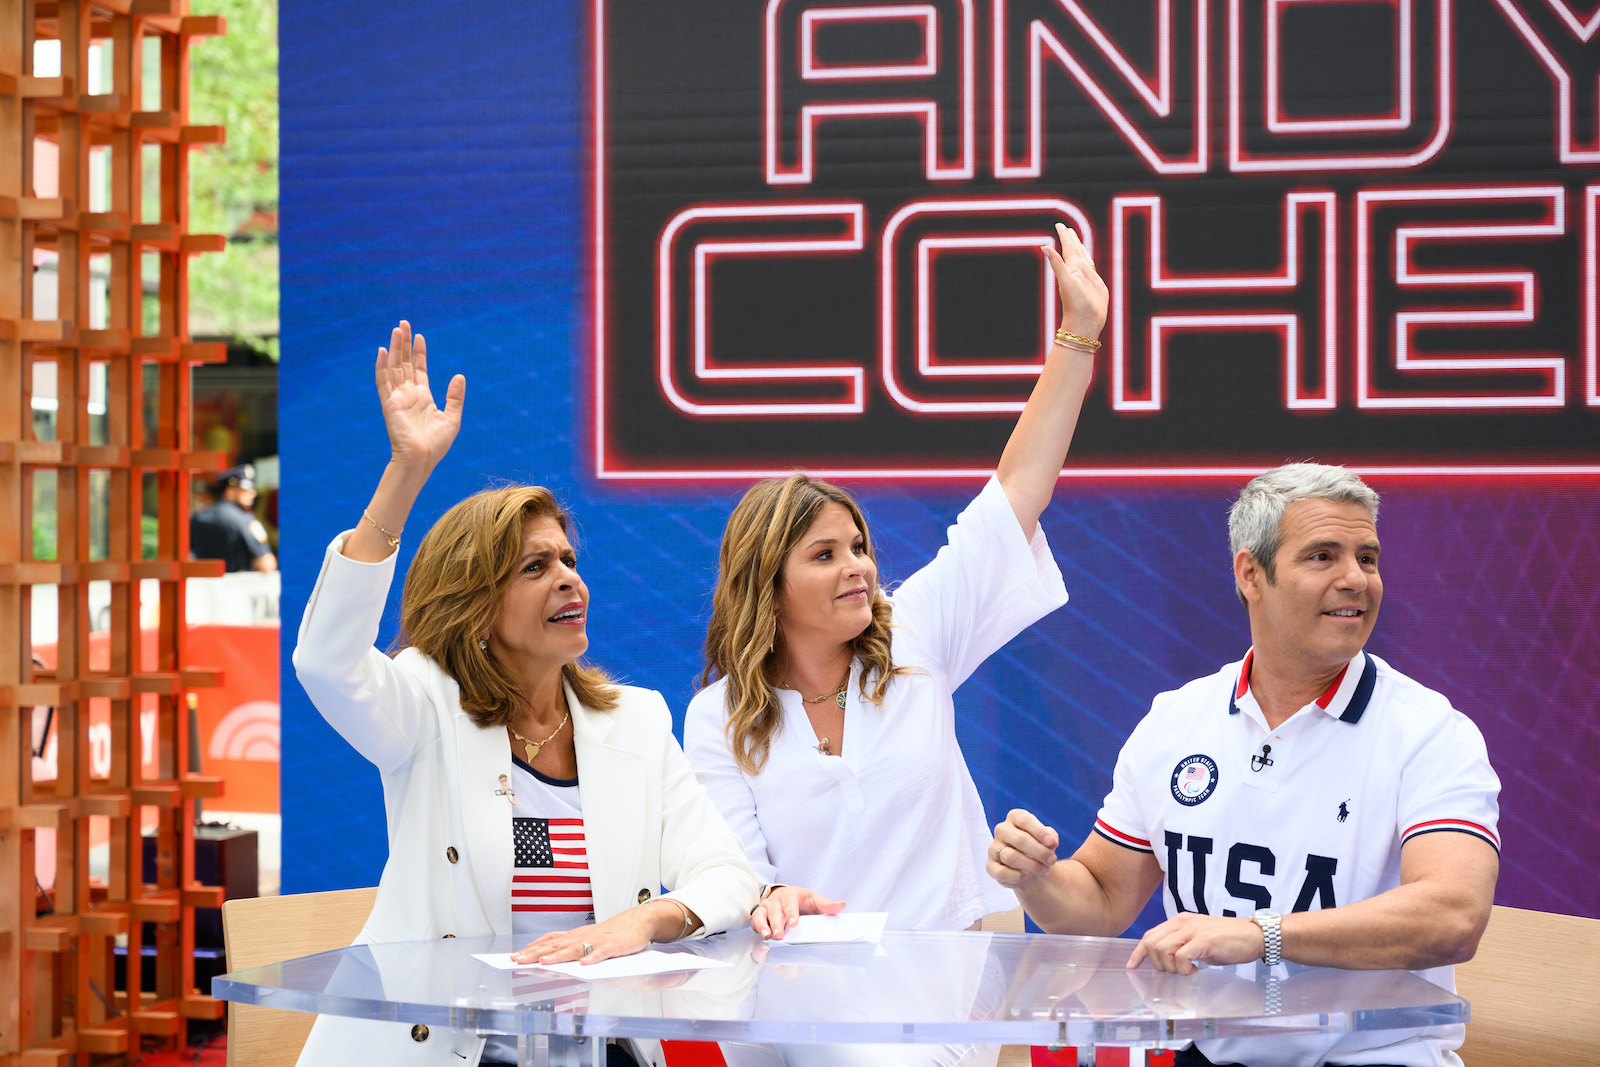 Andy Cohen Rates ‘Today Show’ ‘Real Housewives’ Taglines – Who Were the Big Winners?